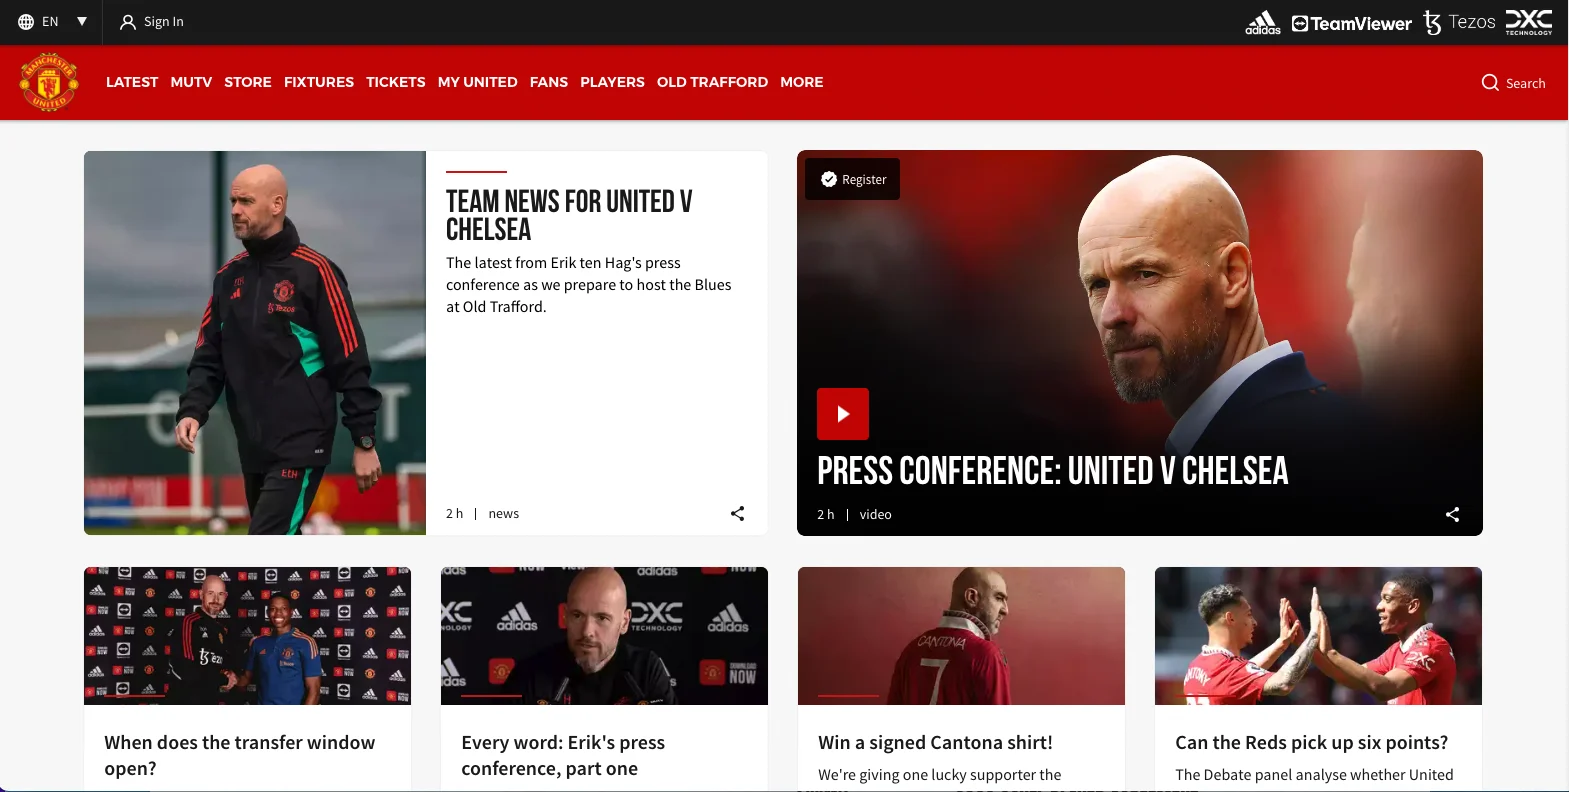 the manchester united football club website